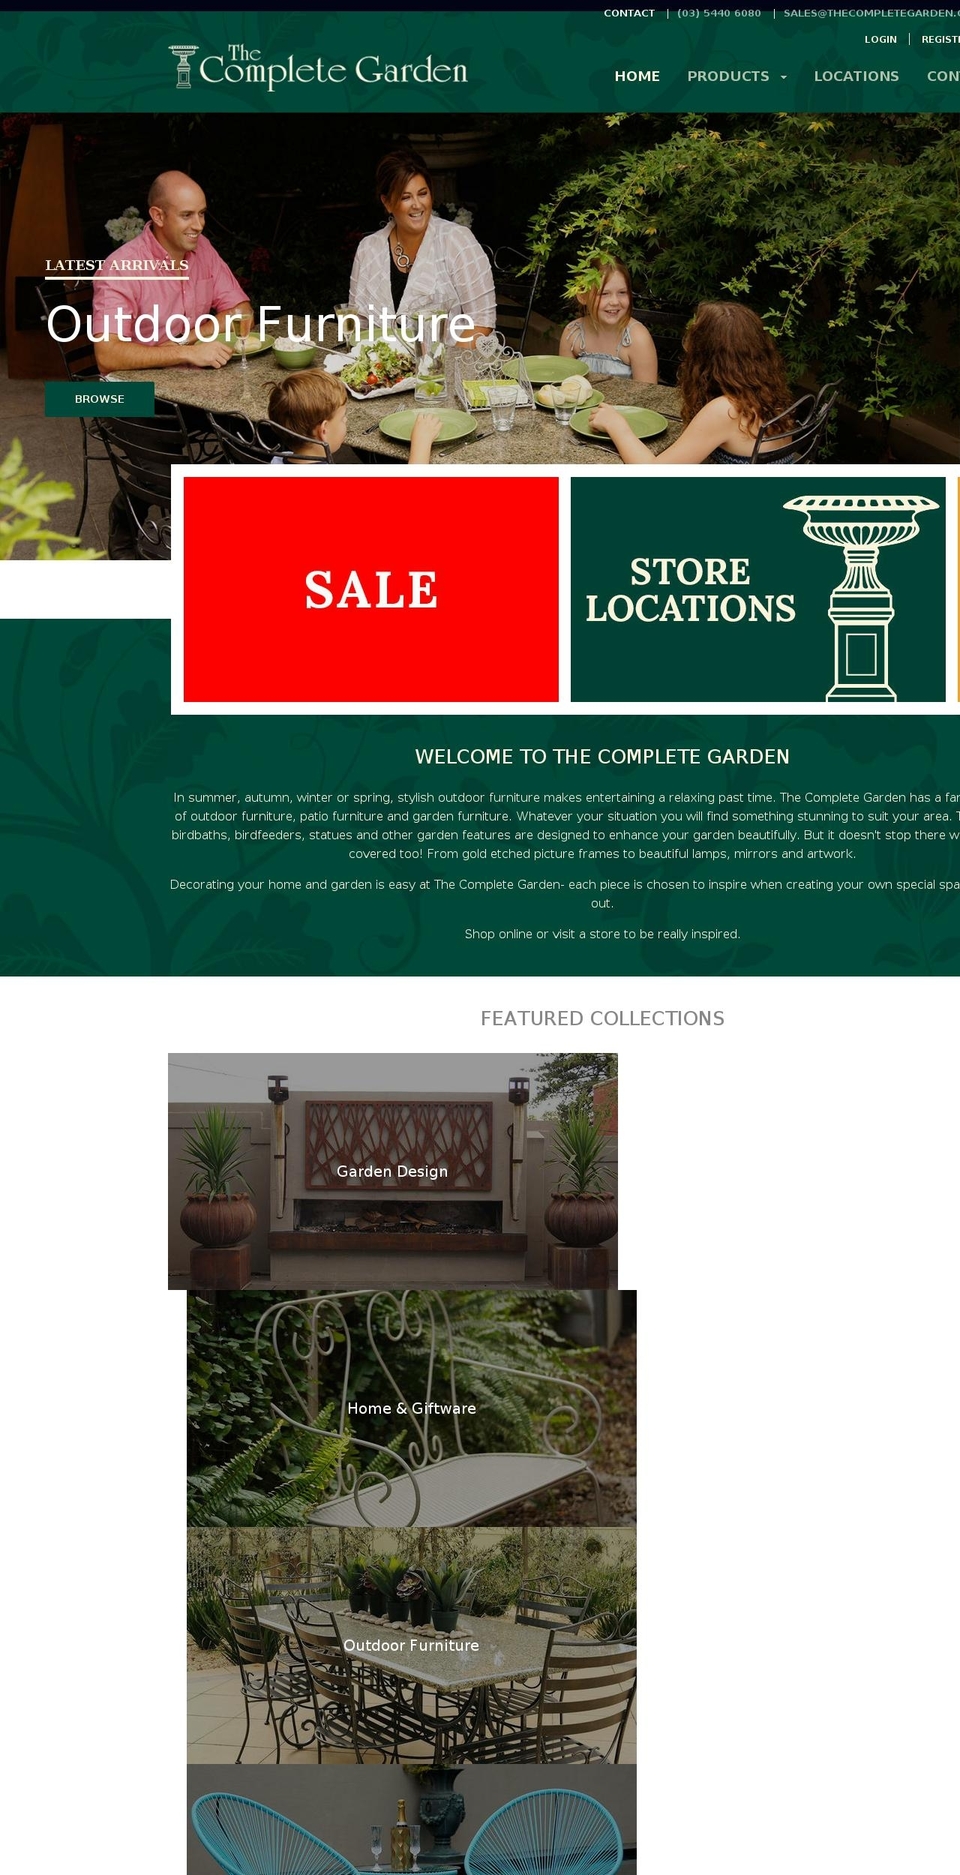 Focal Shopify theme site example thecompletegarden.com.au